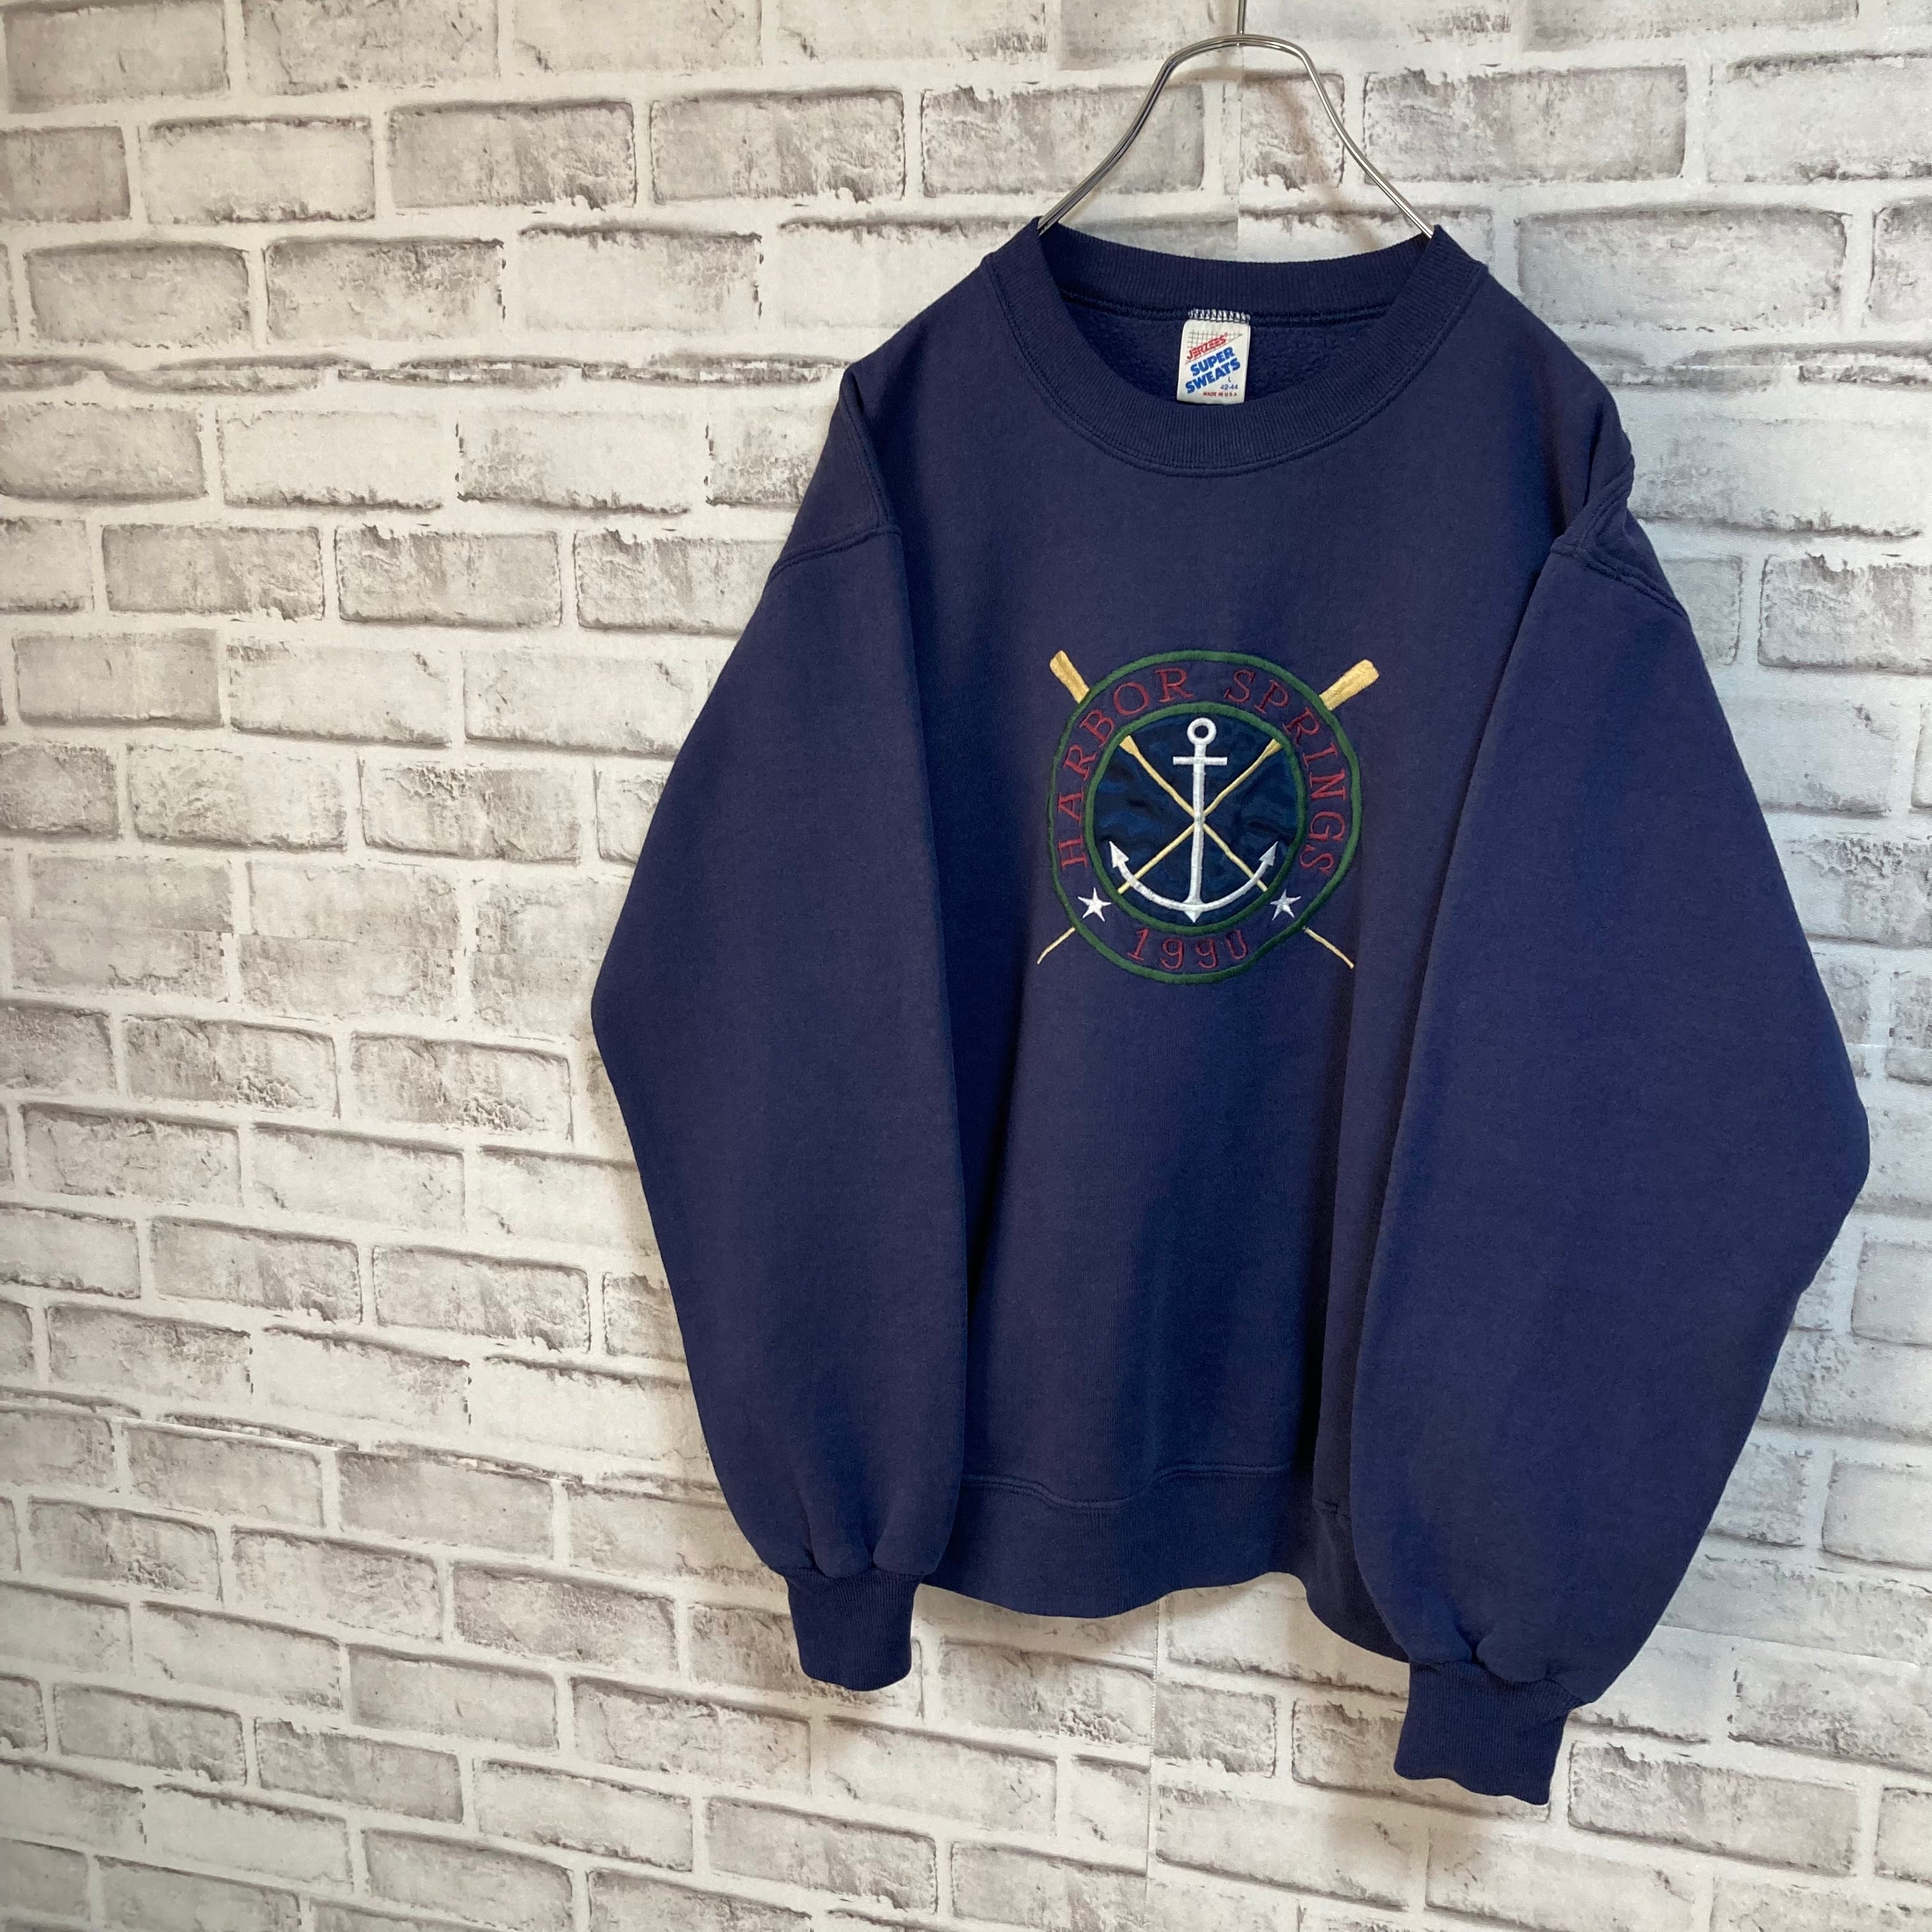 【JERZEES】L/S Sweat L Made in USA 90s ジャージーズ 